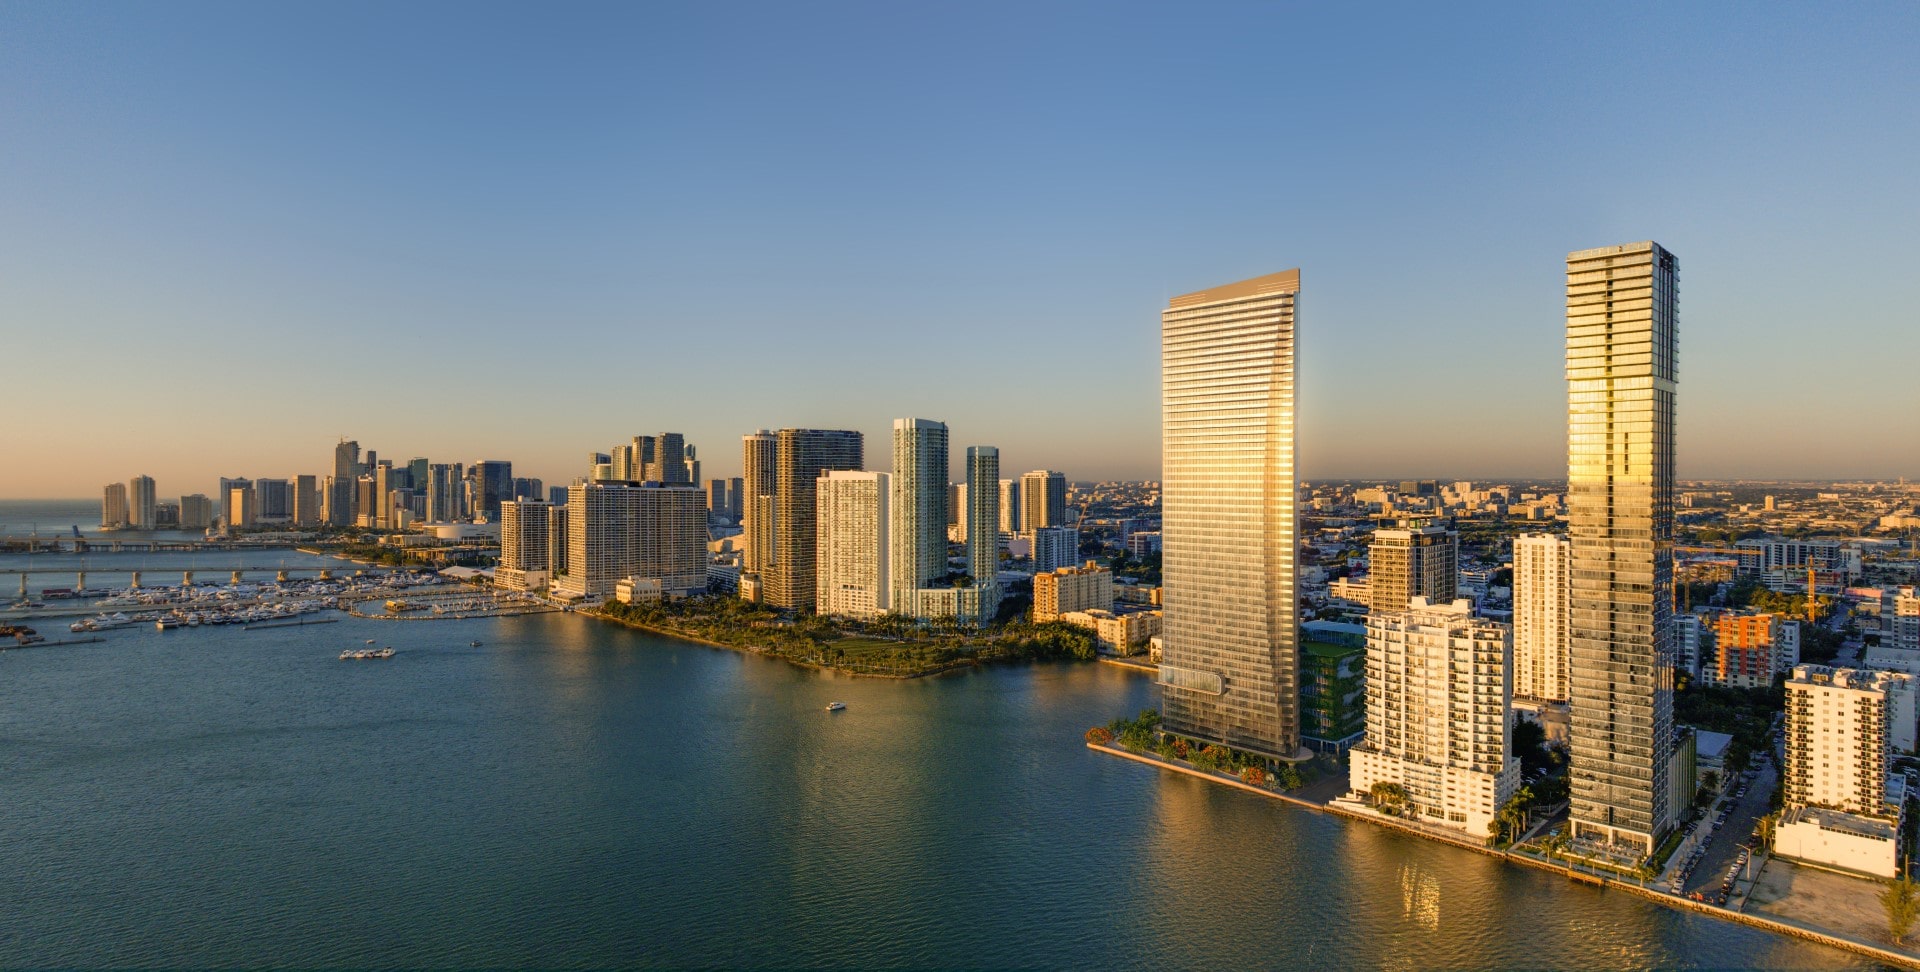 A series of tall buildings along the Florida waterfront.